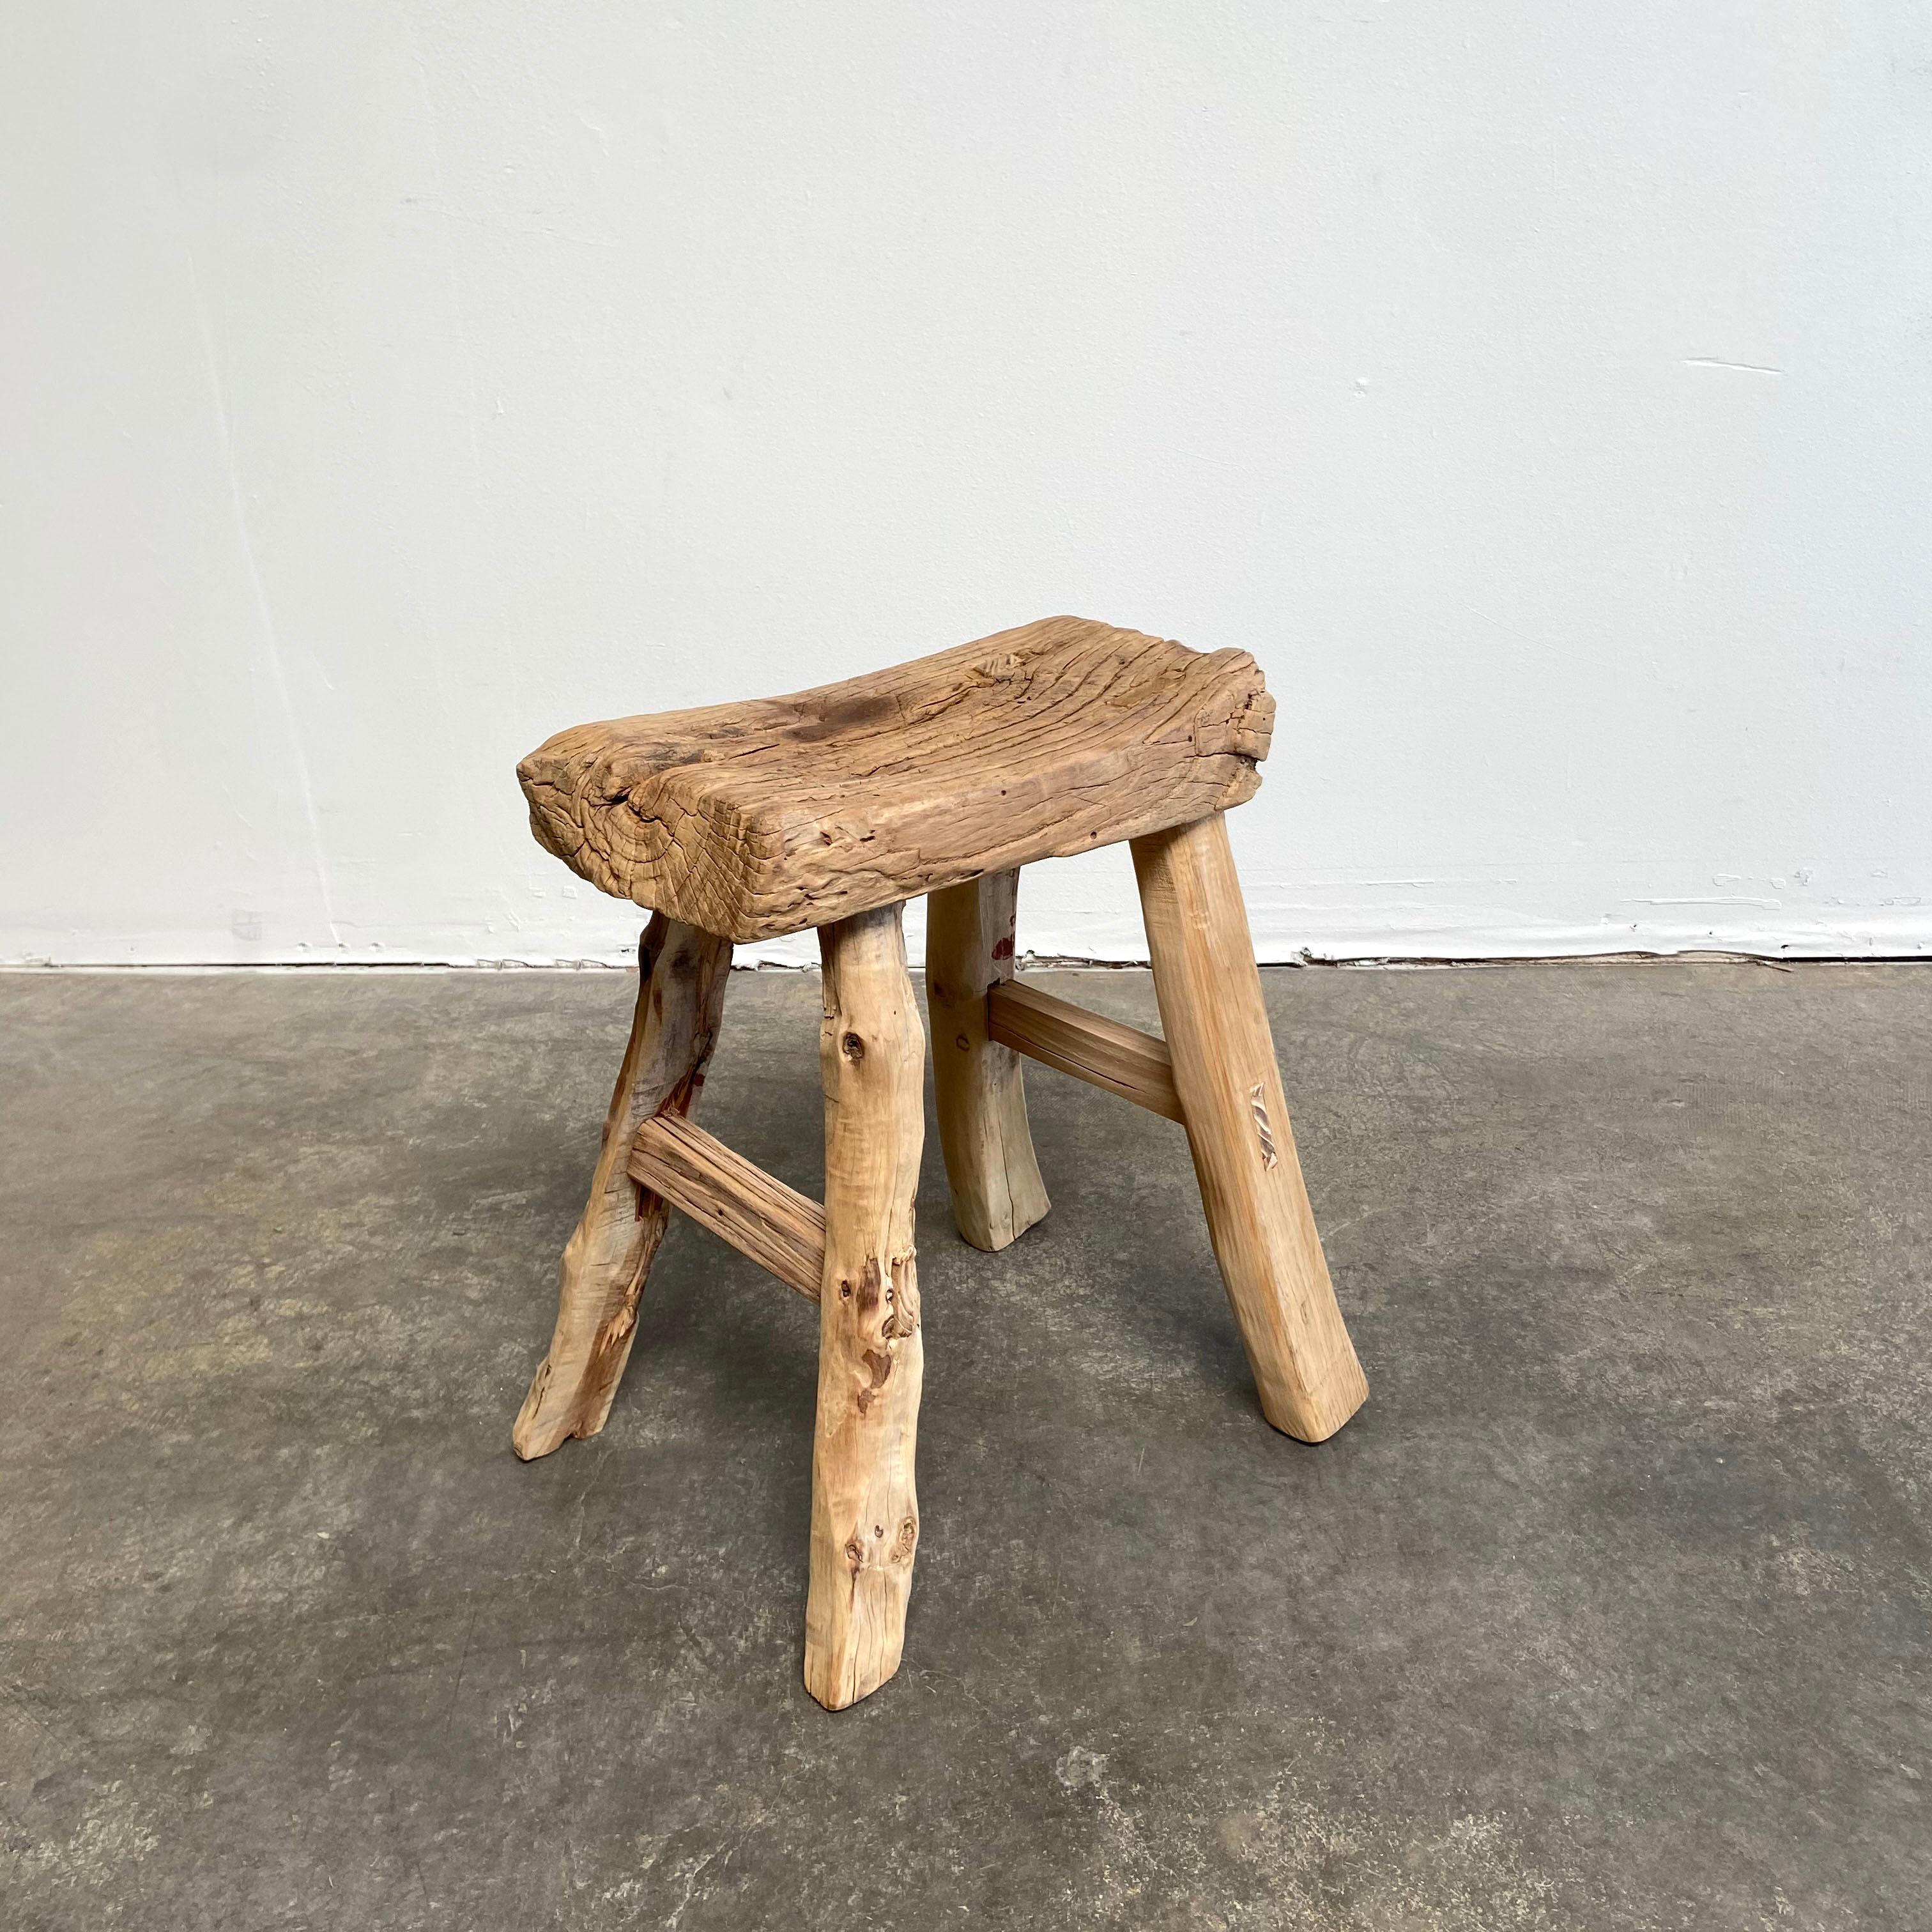 Vintage antique elm wood stool.
These are the real vintage antique elm wood stools! Beautiful antique patina, with weathering and age, these are solid and sturdy ready for daily use, use as a table, stool, drink table, they are great for any space.